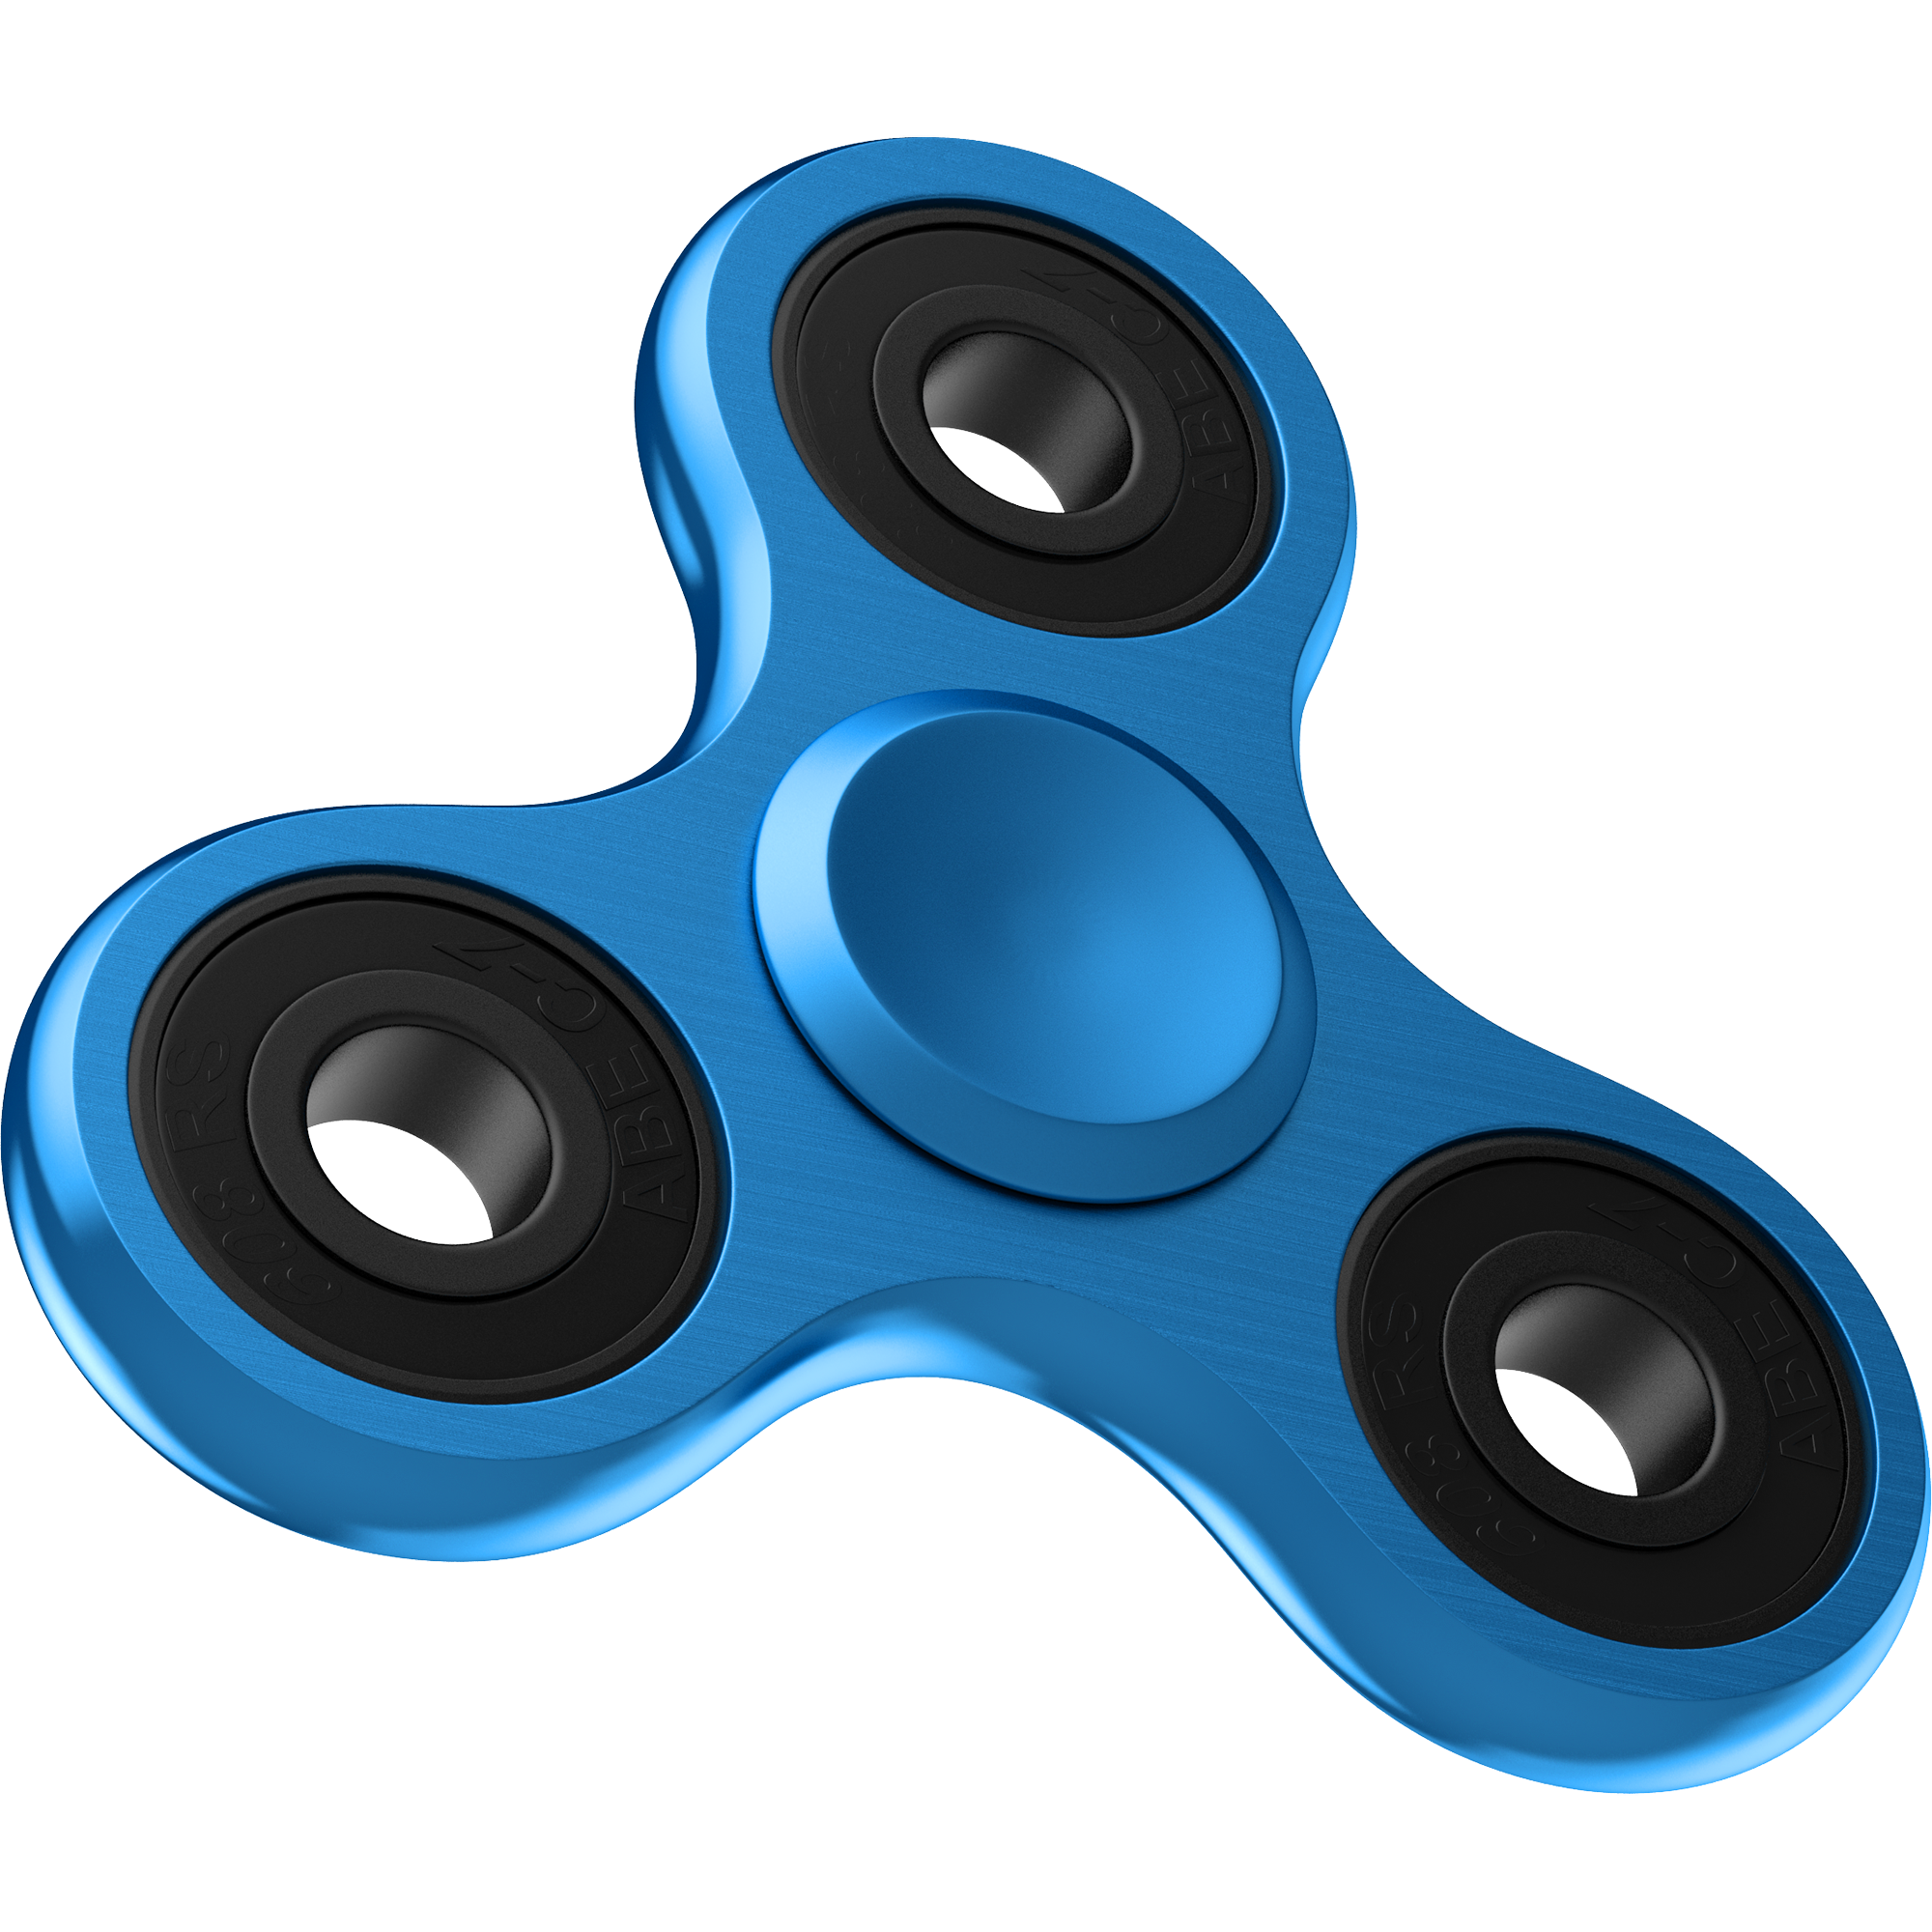 Alloy Blue 360 Spinner Focus Fidget Toy Tri-Spinner Focus Toy for Kids & Adults - image 2 of 5